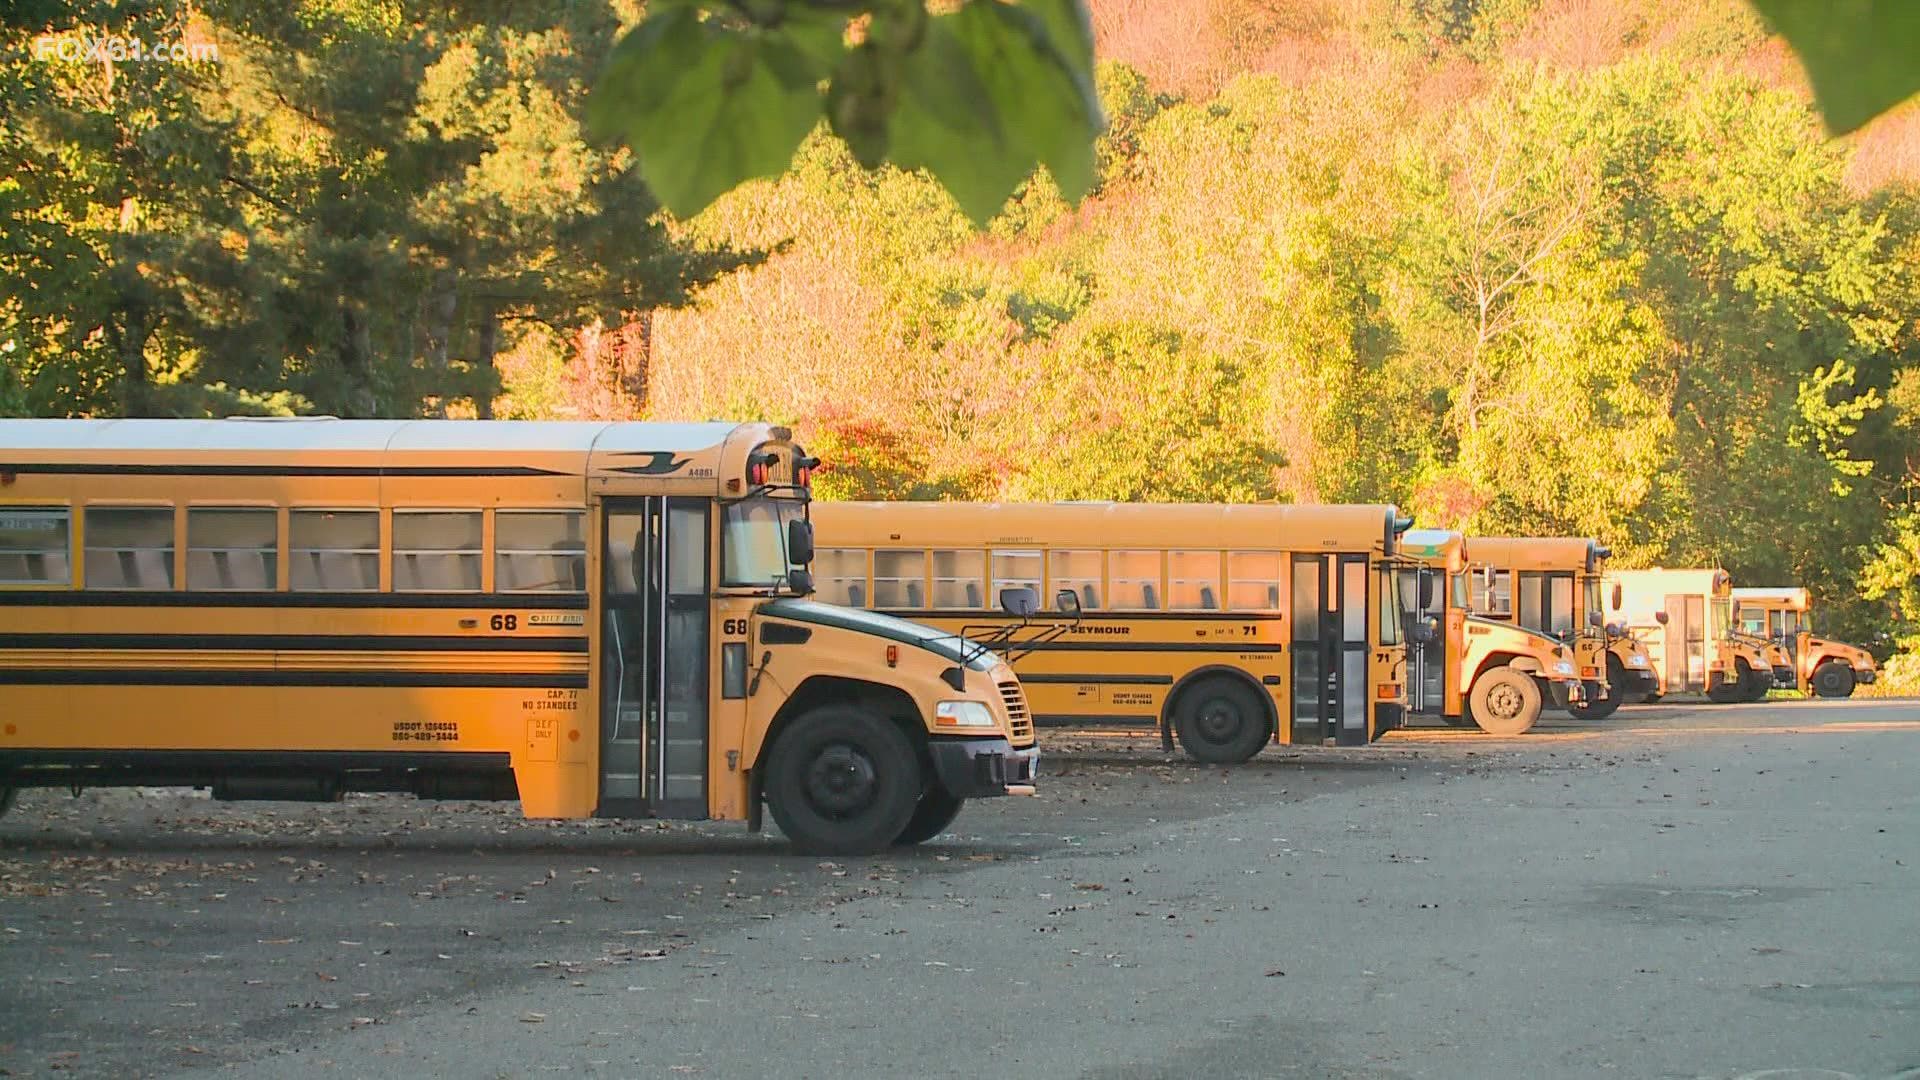 The national bus driver shortage is forcing districts across the state to get creative.